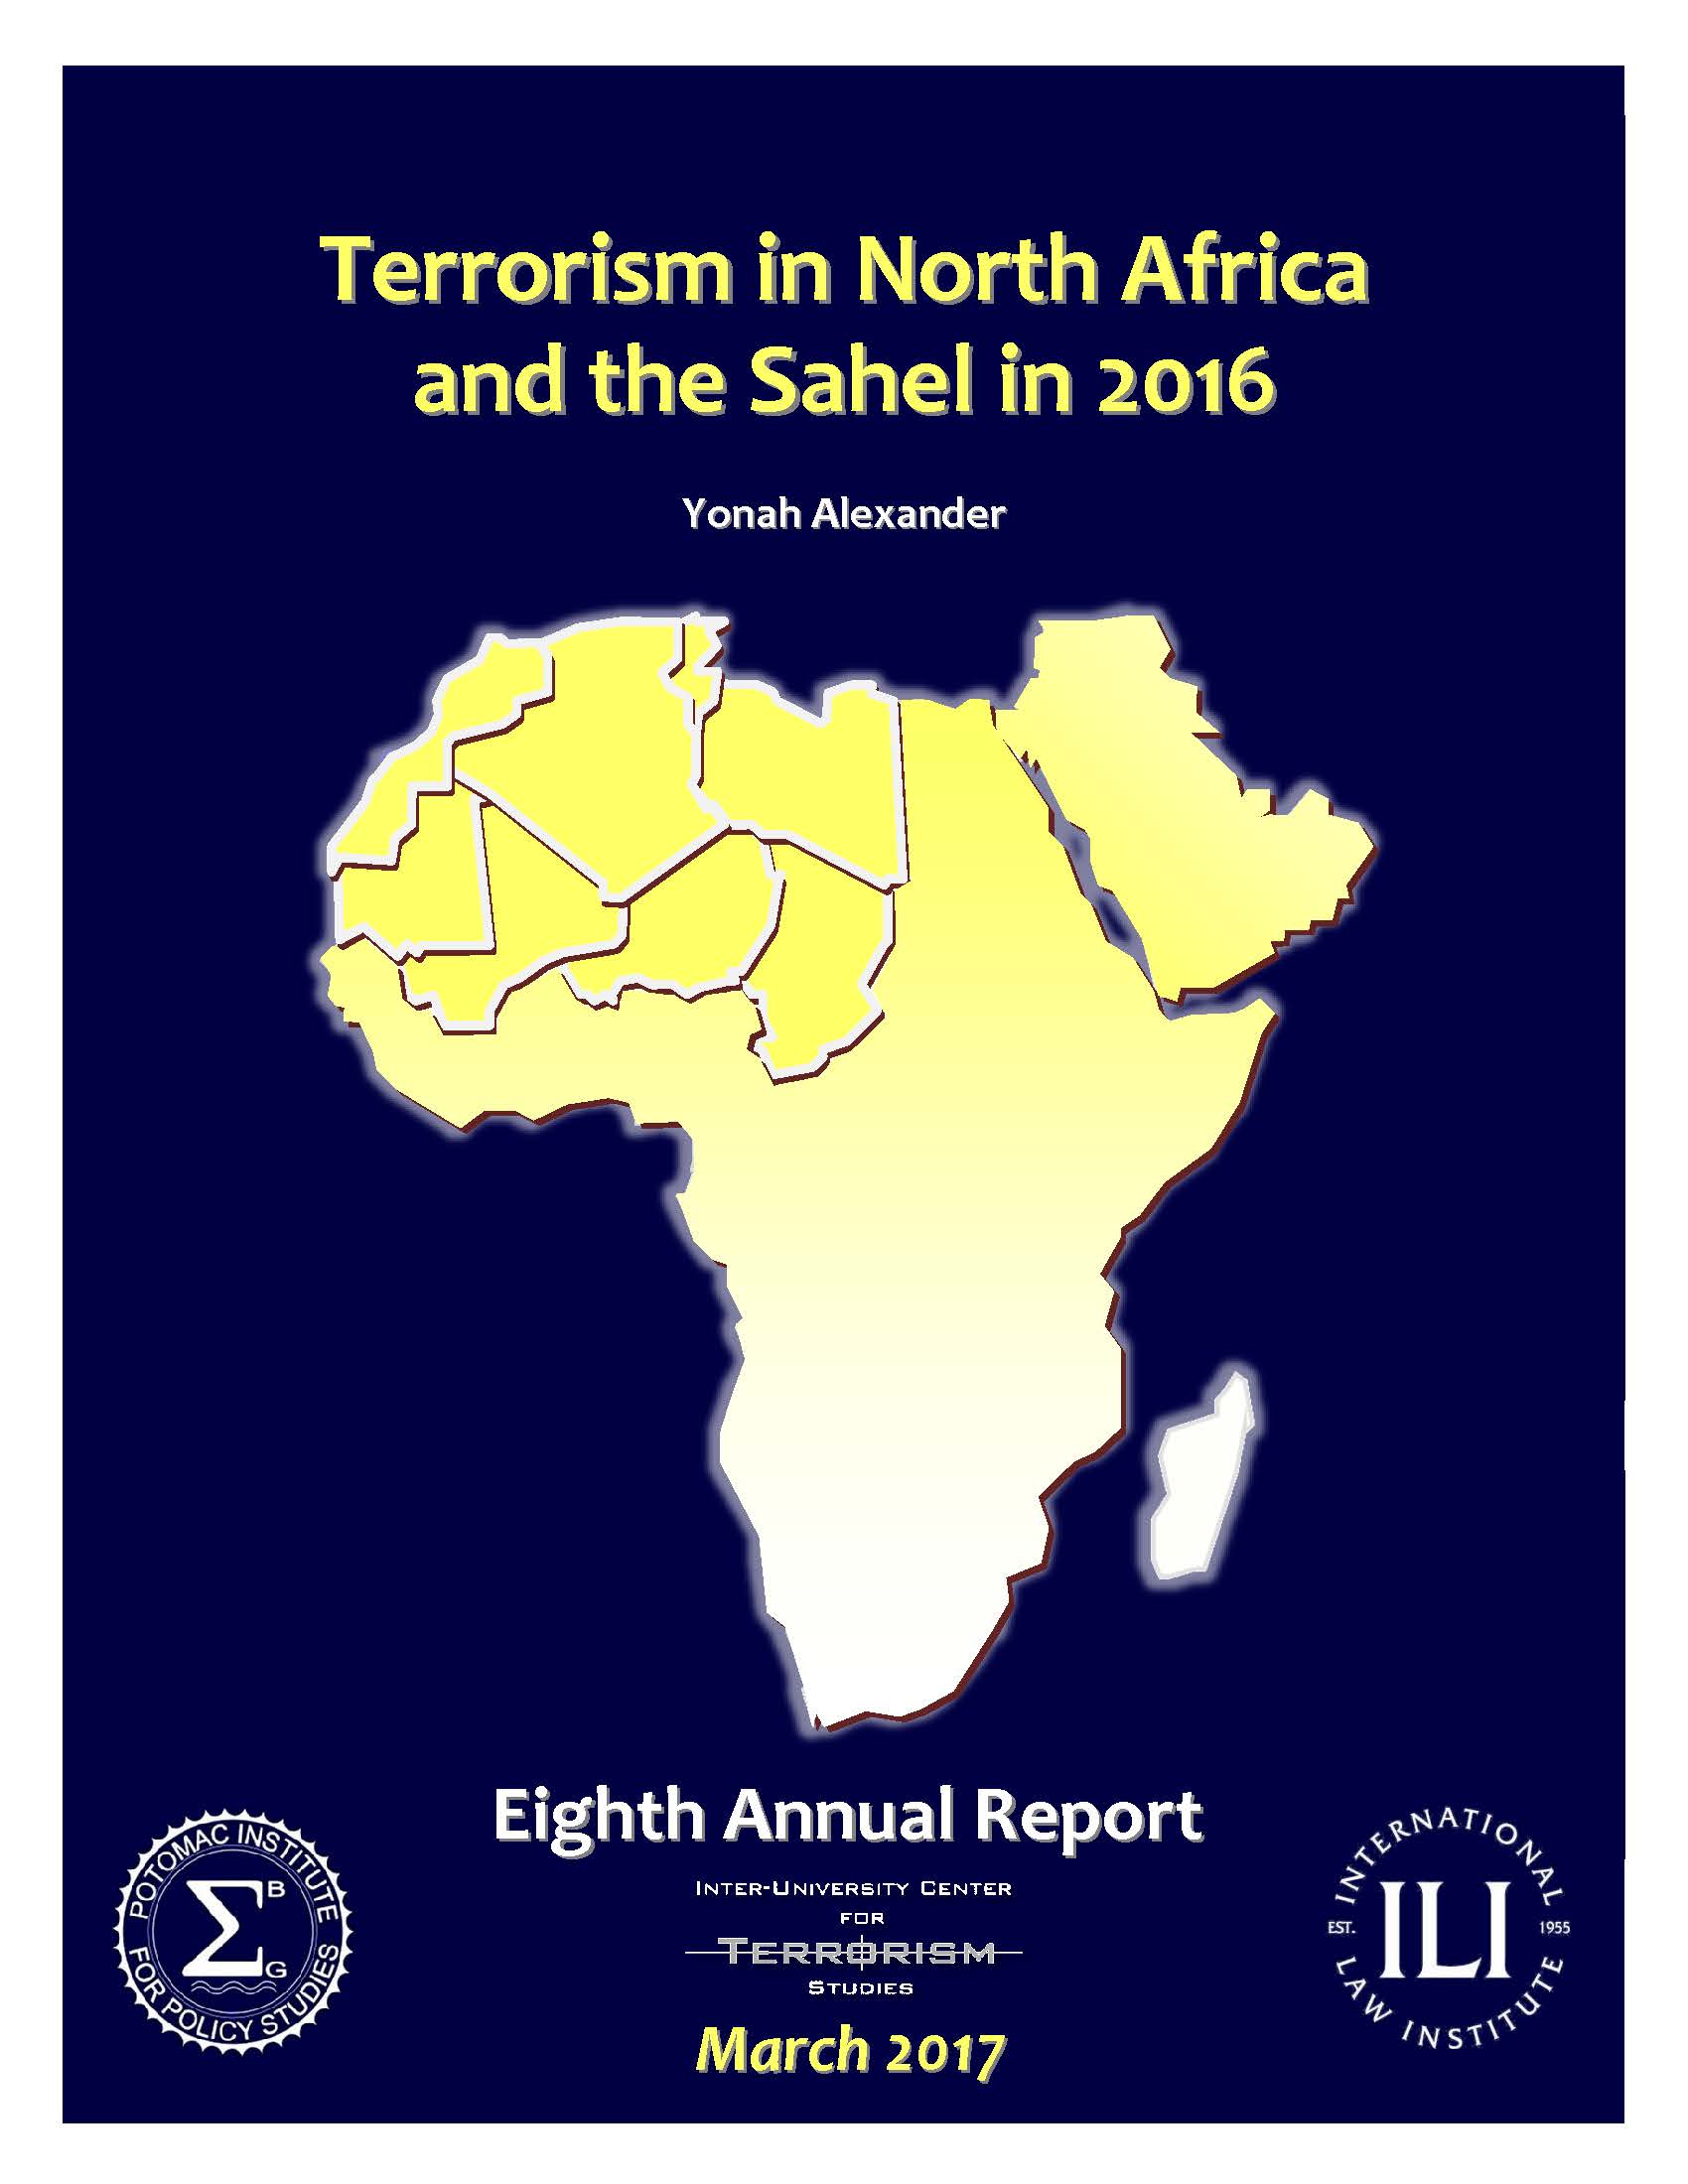 Terrorism in North Africa and the Sahel in 2016